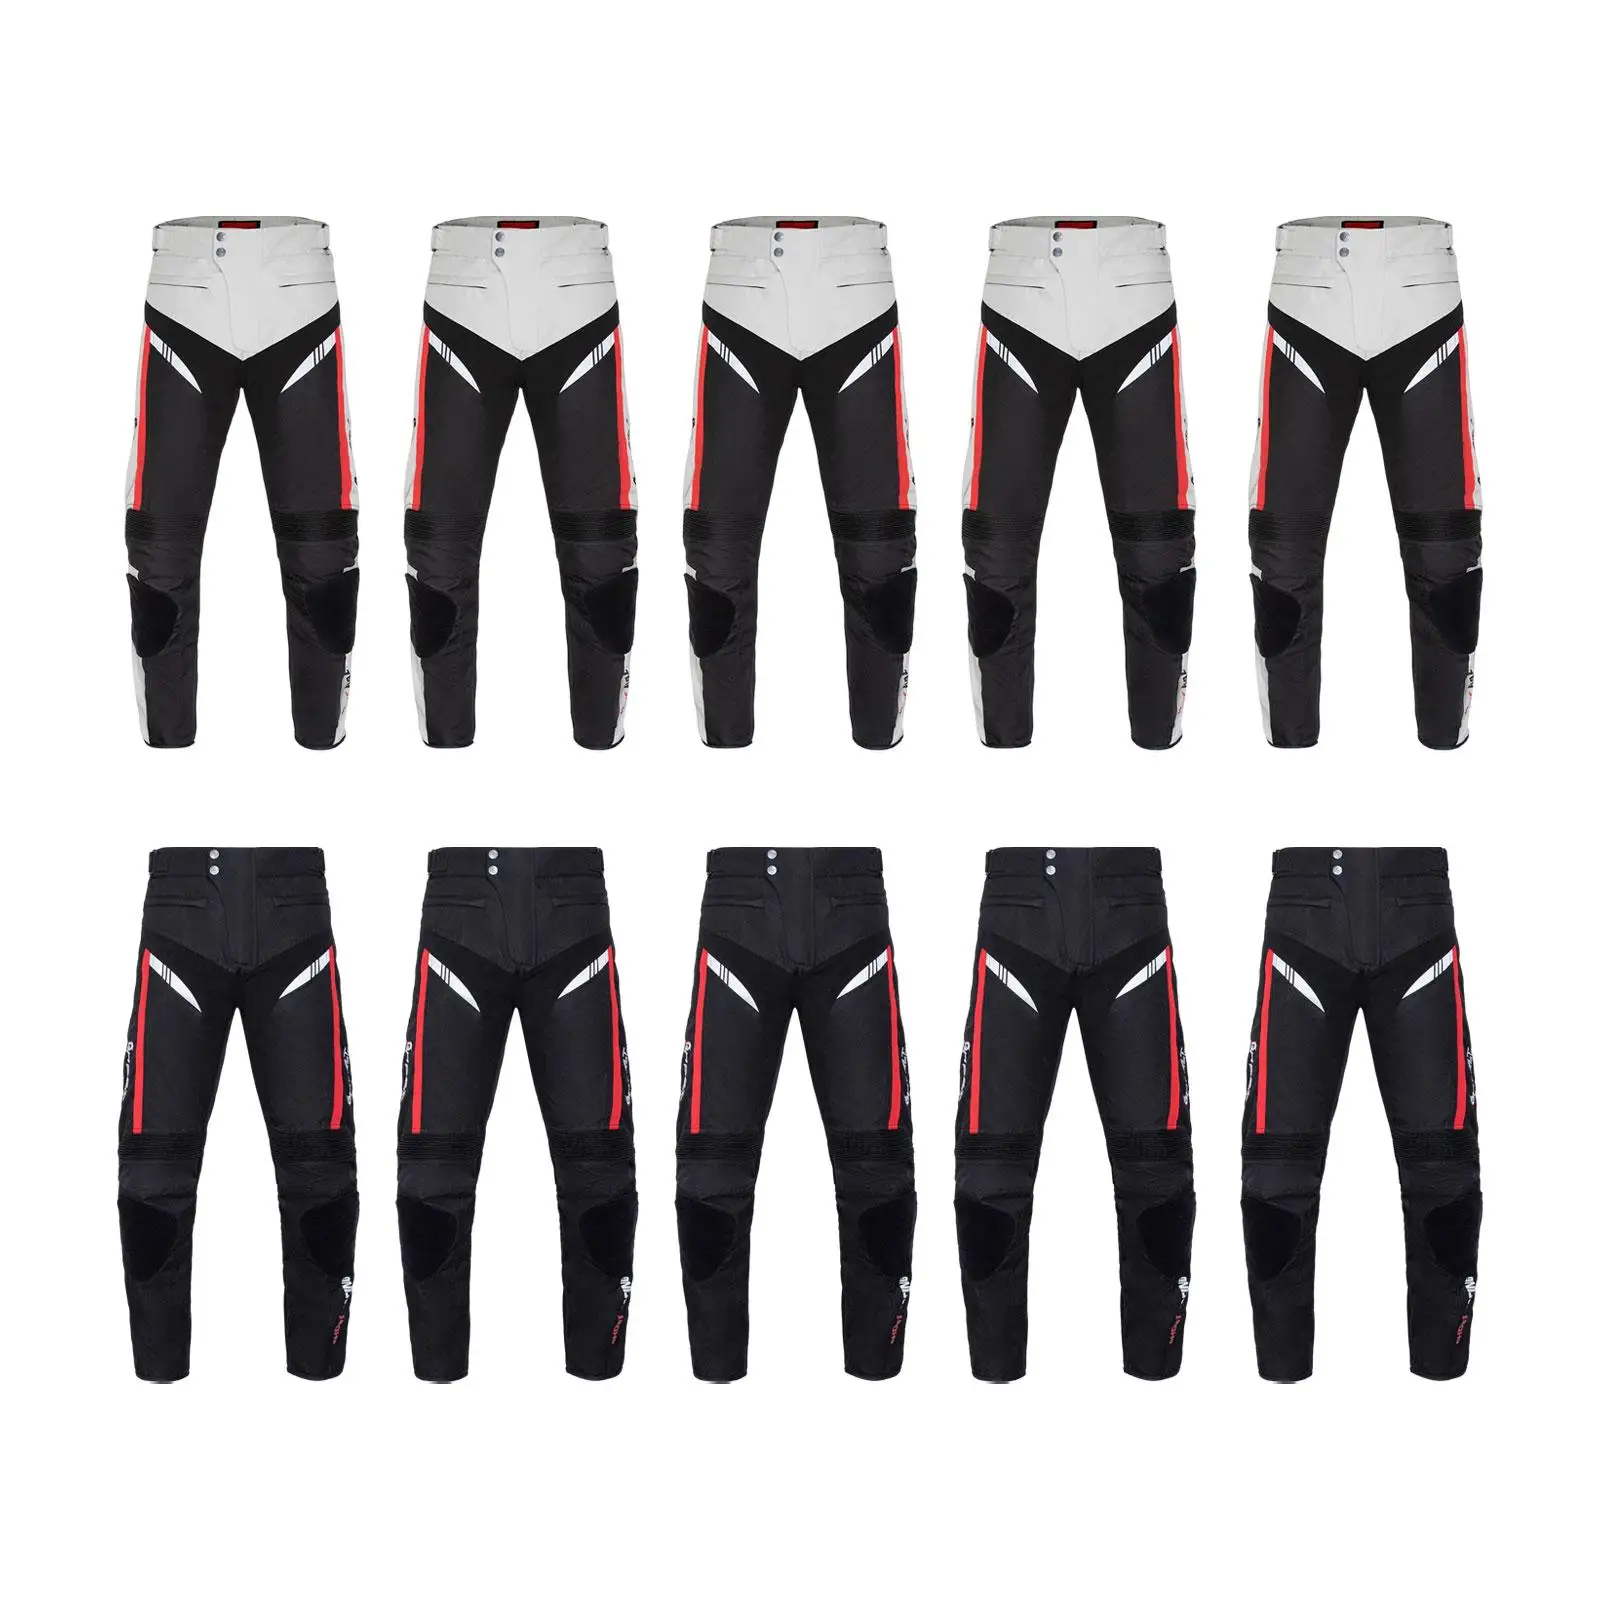 Motorcycle Pants Warm Wear with Reflective Strip Racing Overpants for Motorbike Riding Motocross Dirt Bike Cycling